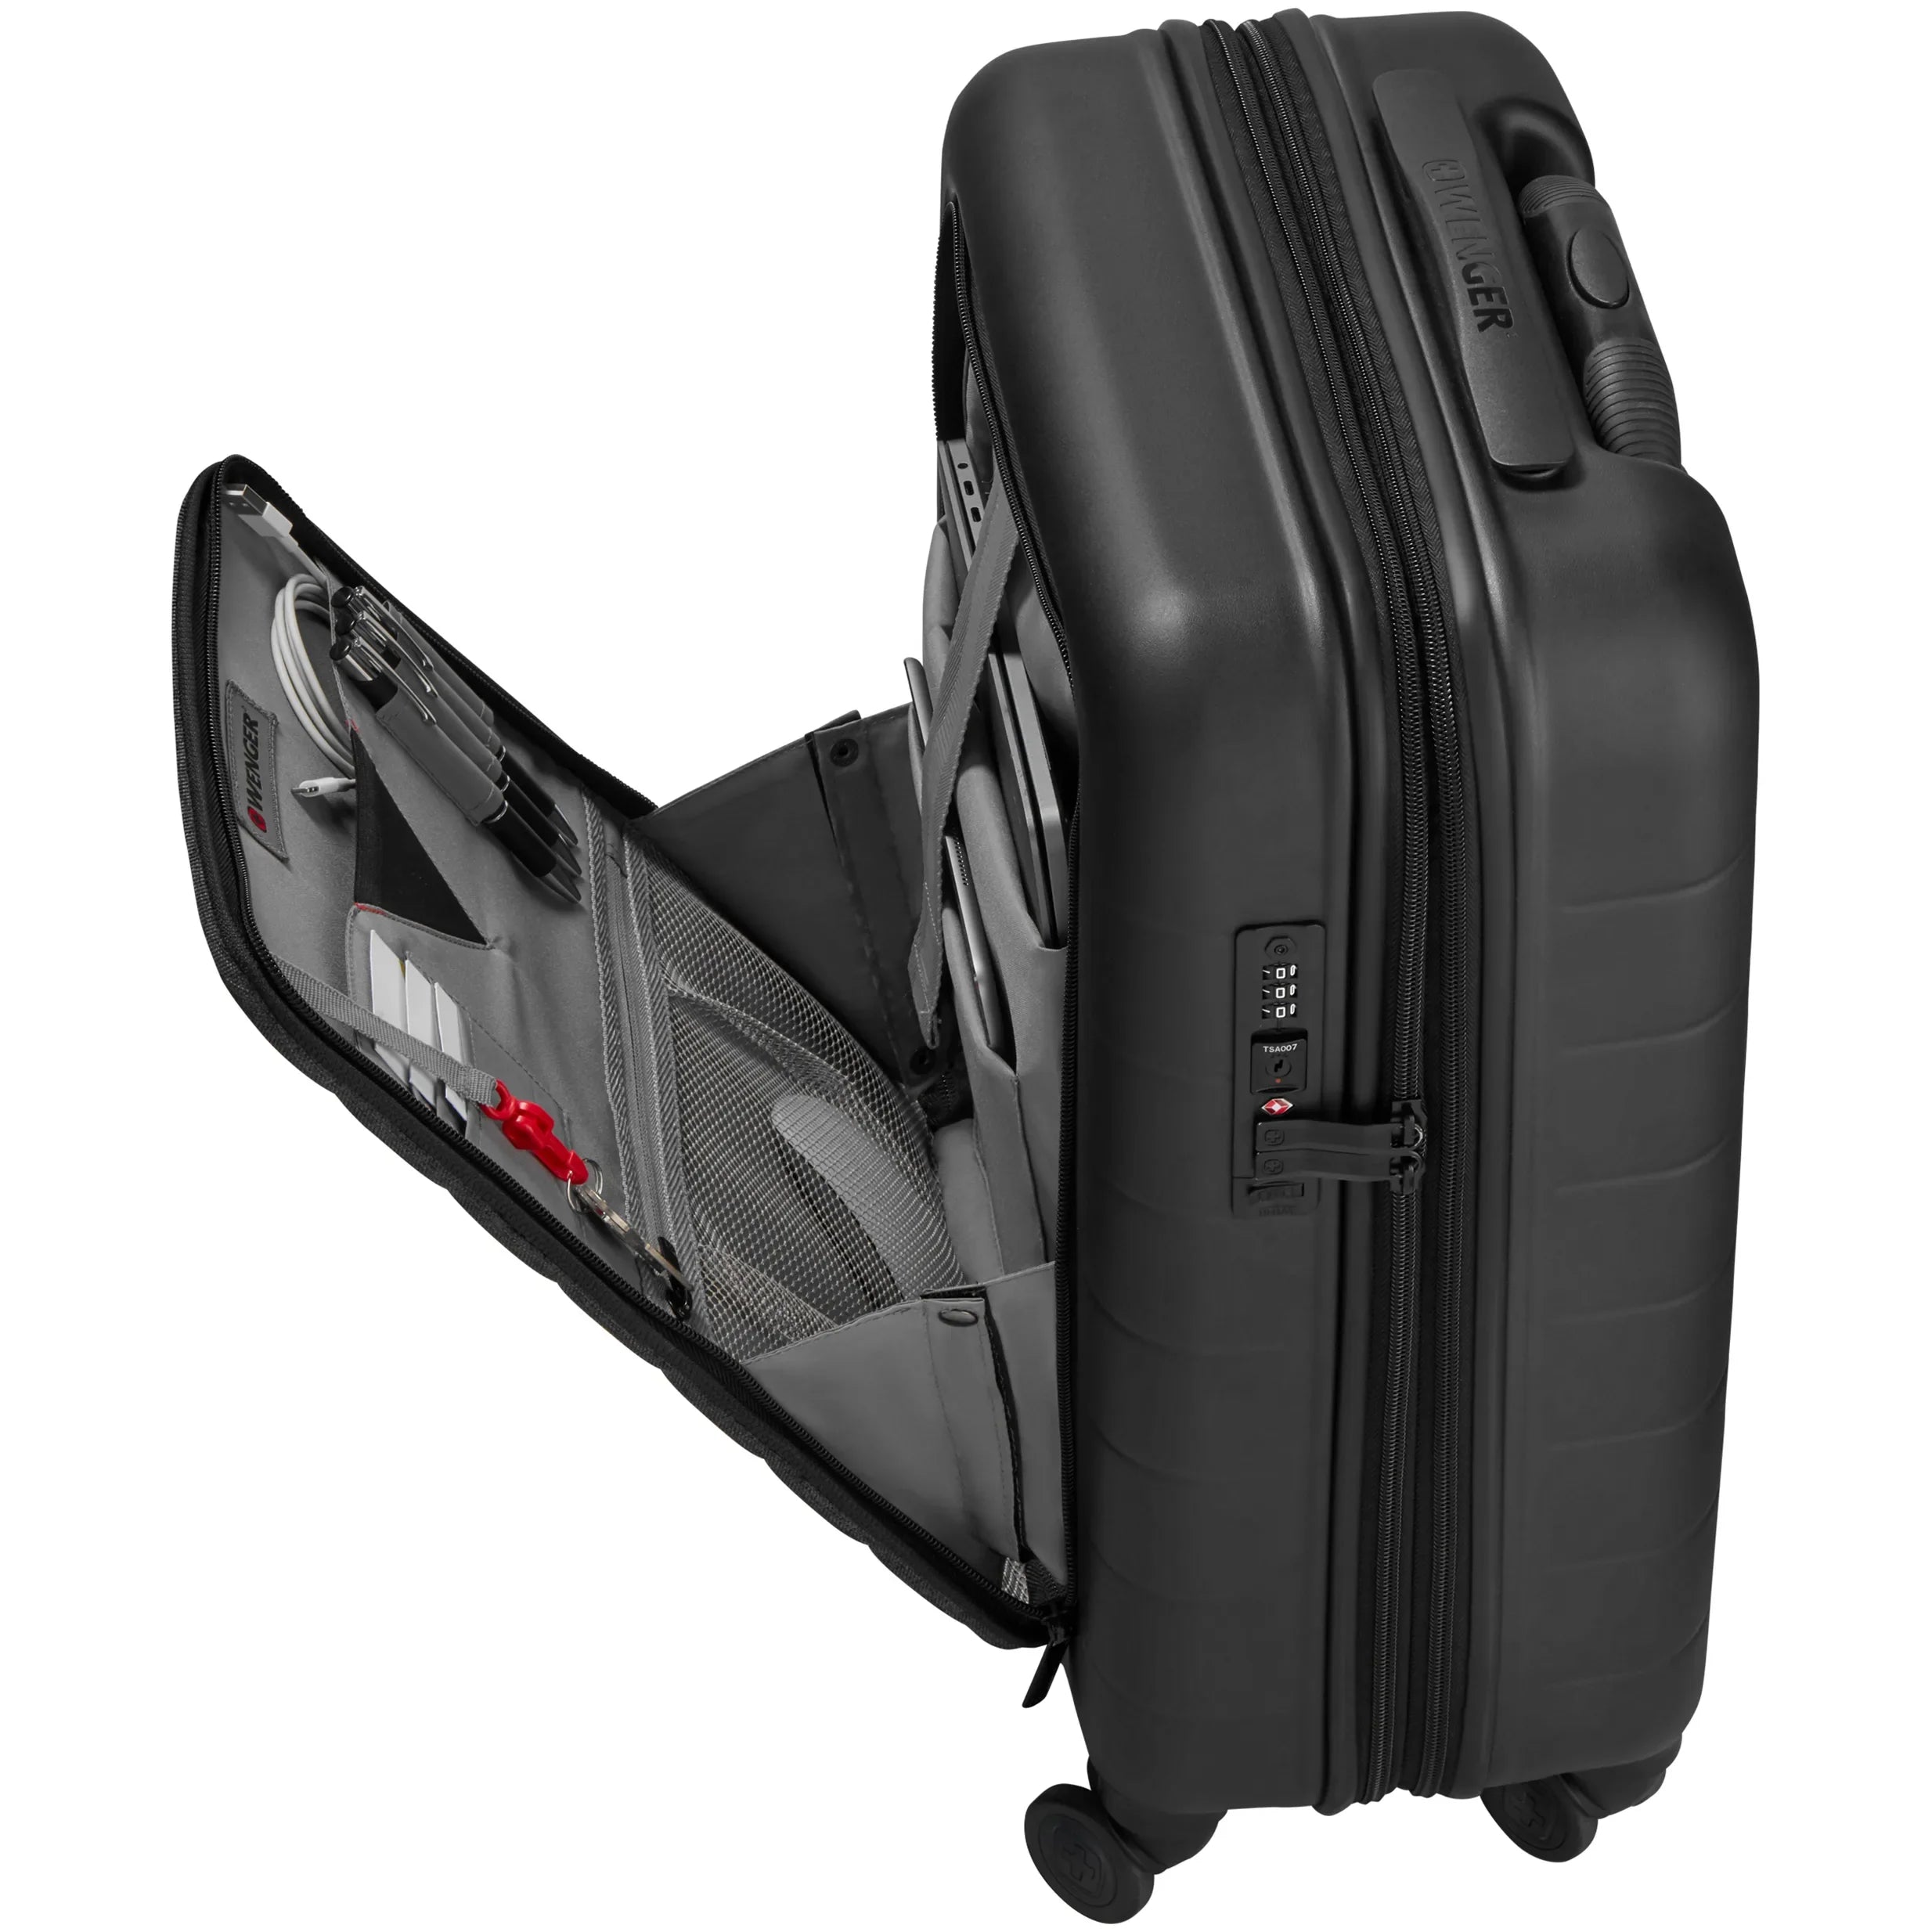 Wenger Luggage Syntry Carry-On Case 55 cm - Black/Heather Grey